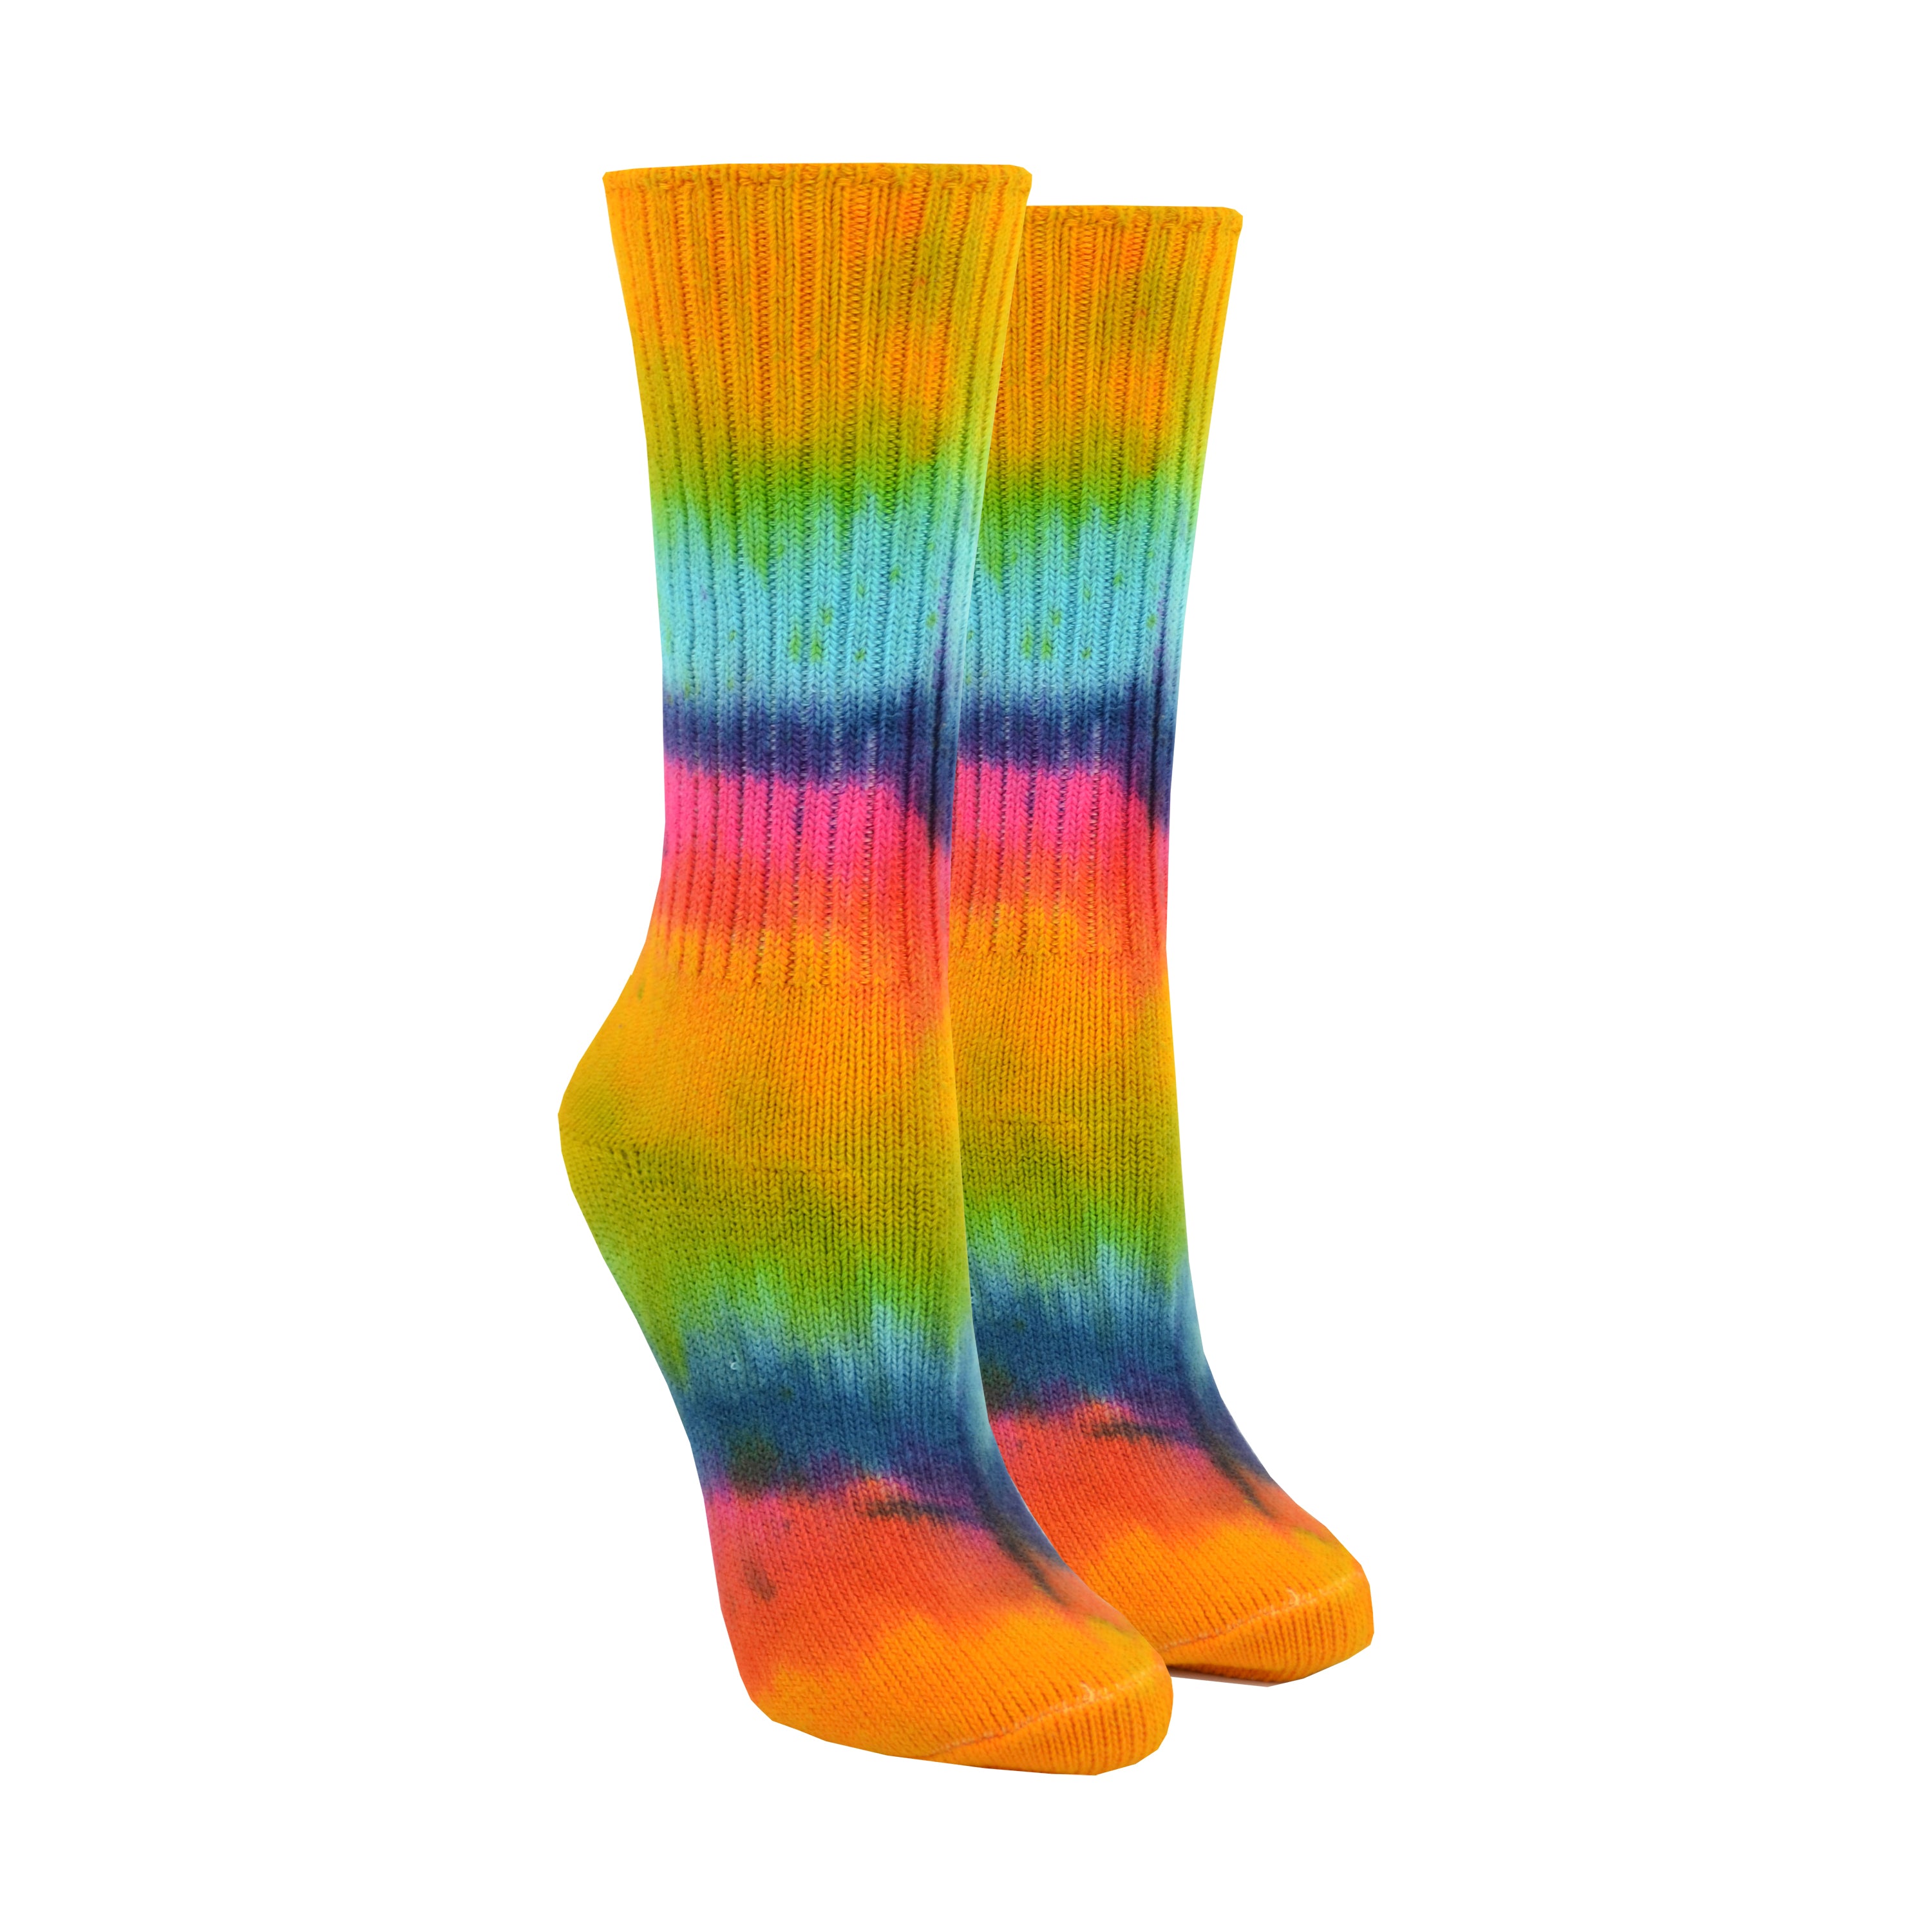 Shown on a foot form, a pair of unisex Maggie’s Organic cotton crew socks with tie dye of yellow, green, blue, red and purple